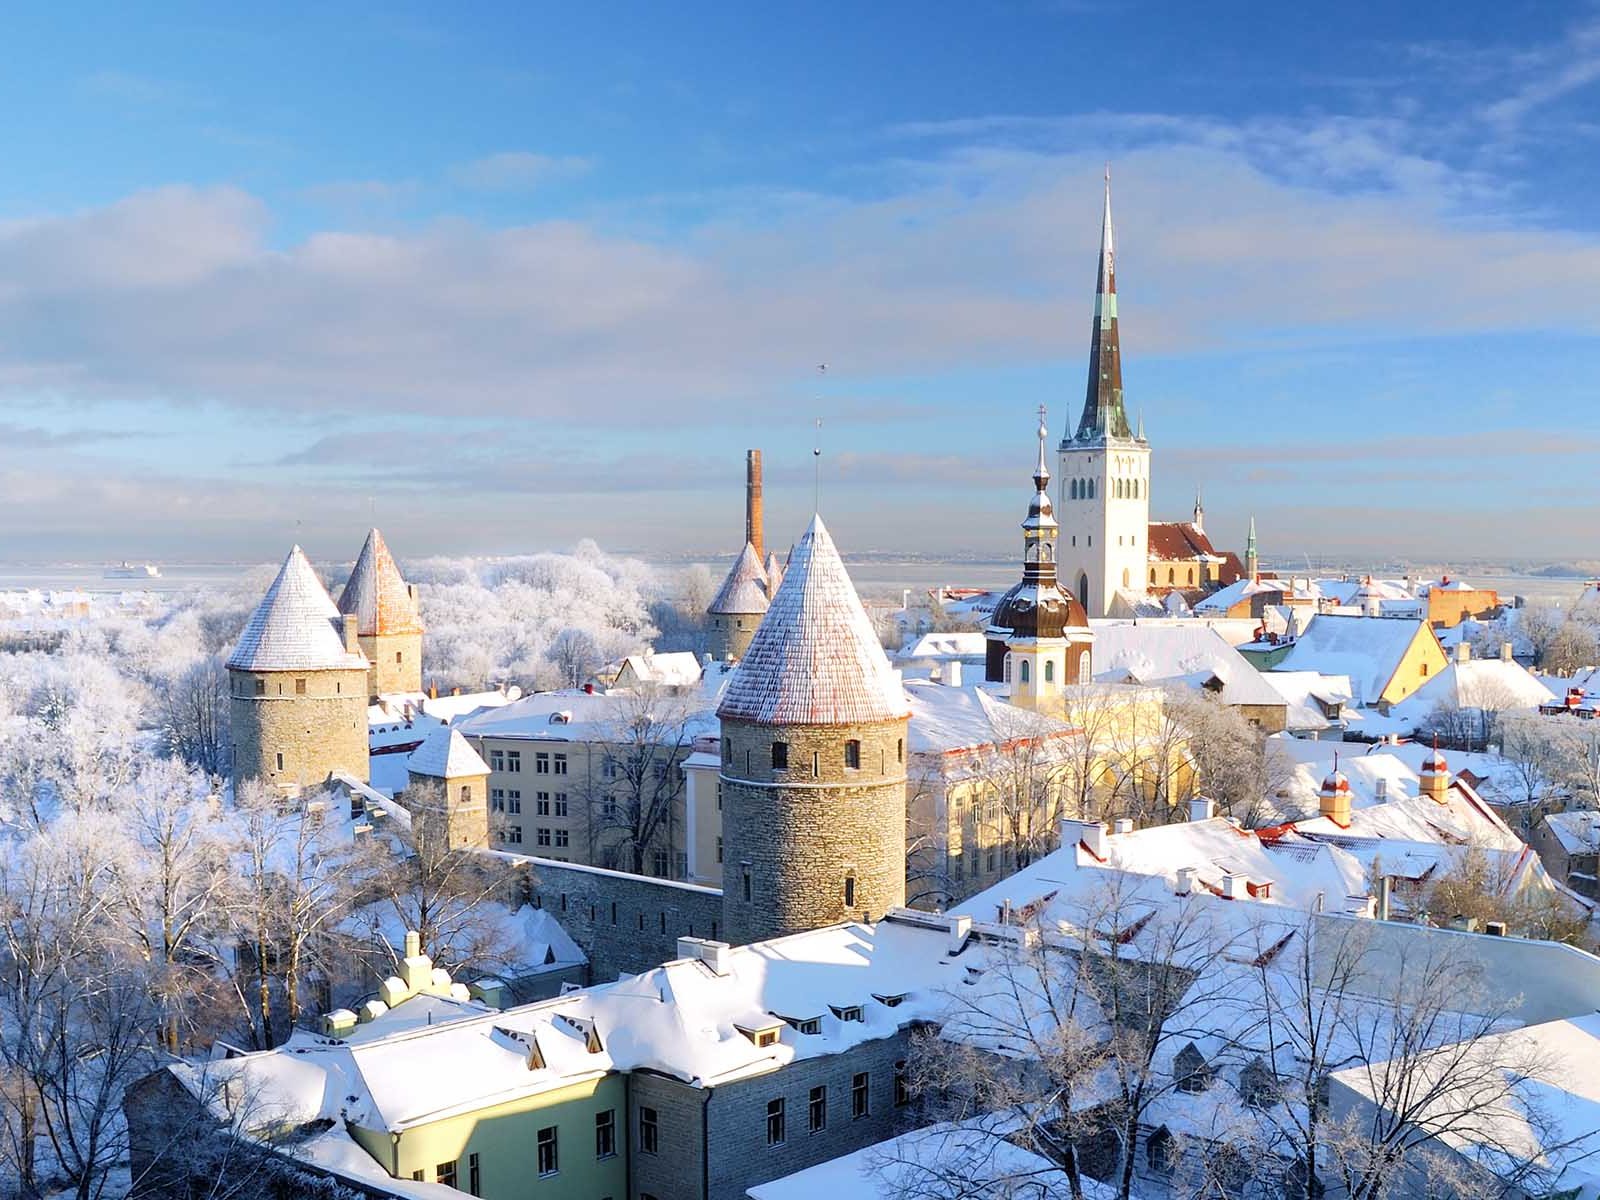 Head to eastern Europe for a white Christmas.